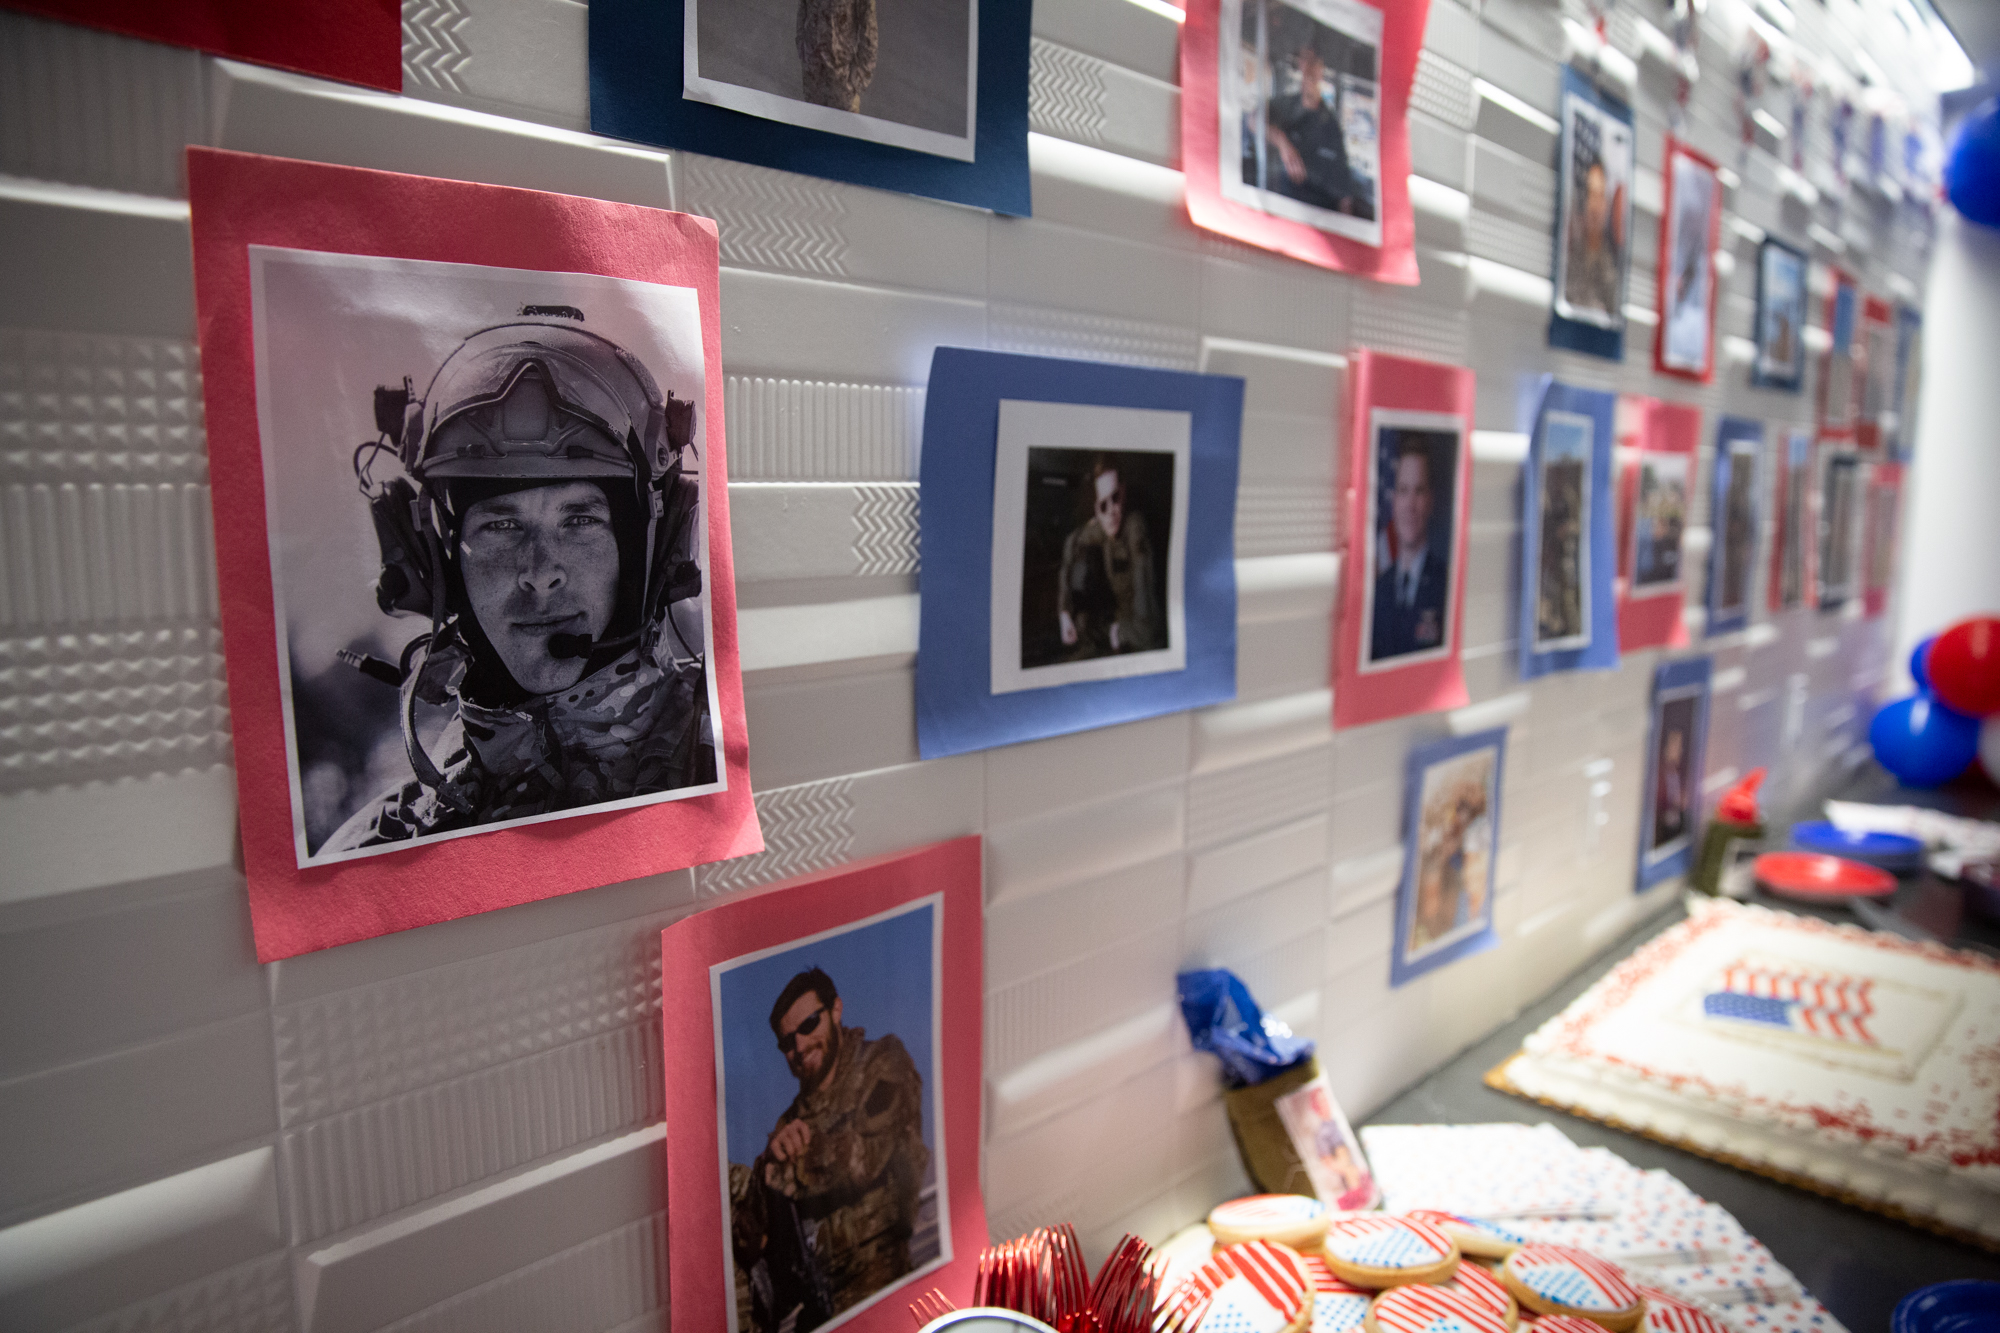 A wall of photographs show student veterans in uniform. American flag themed cookies and cakes are below